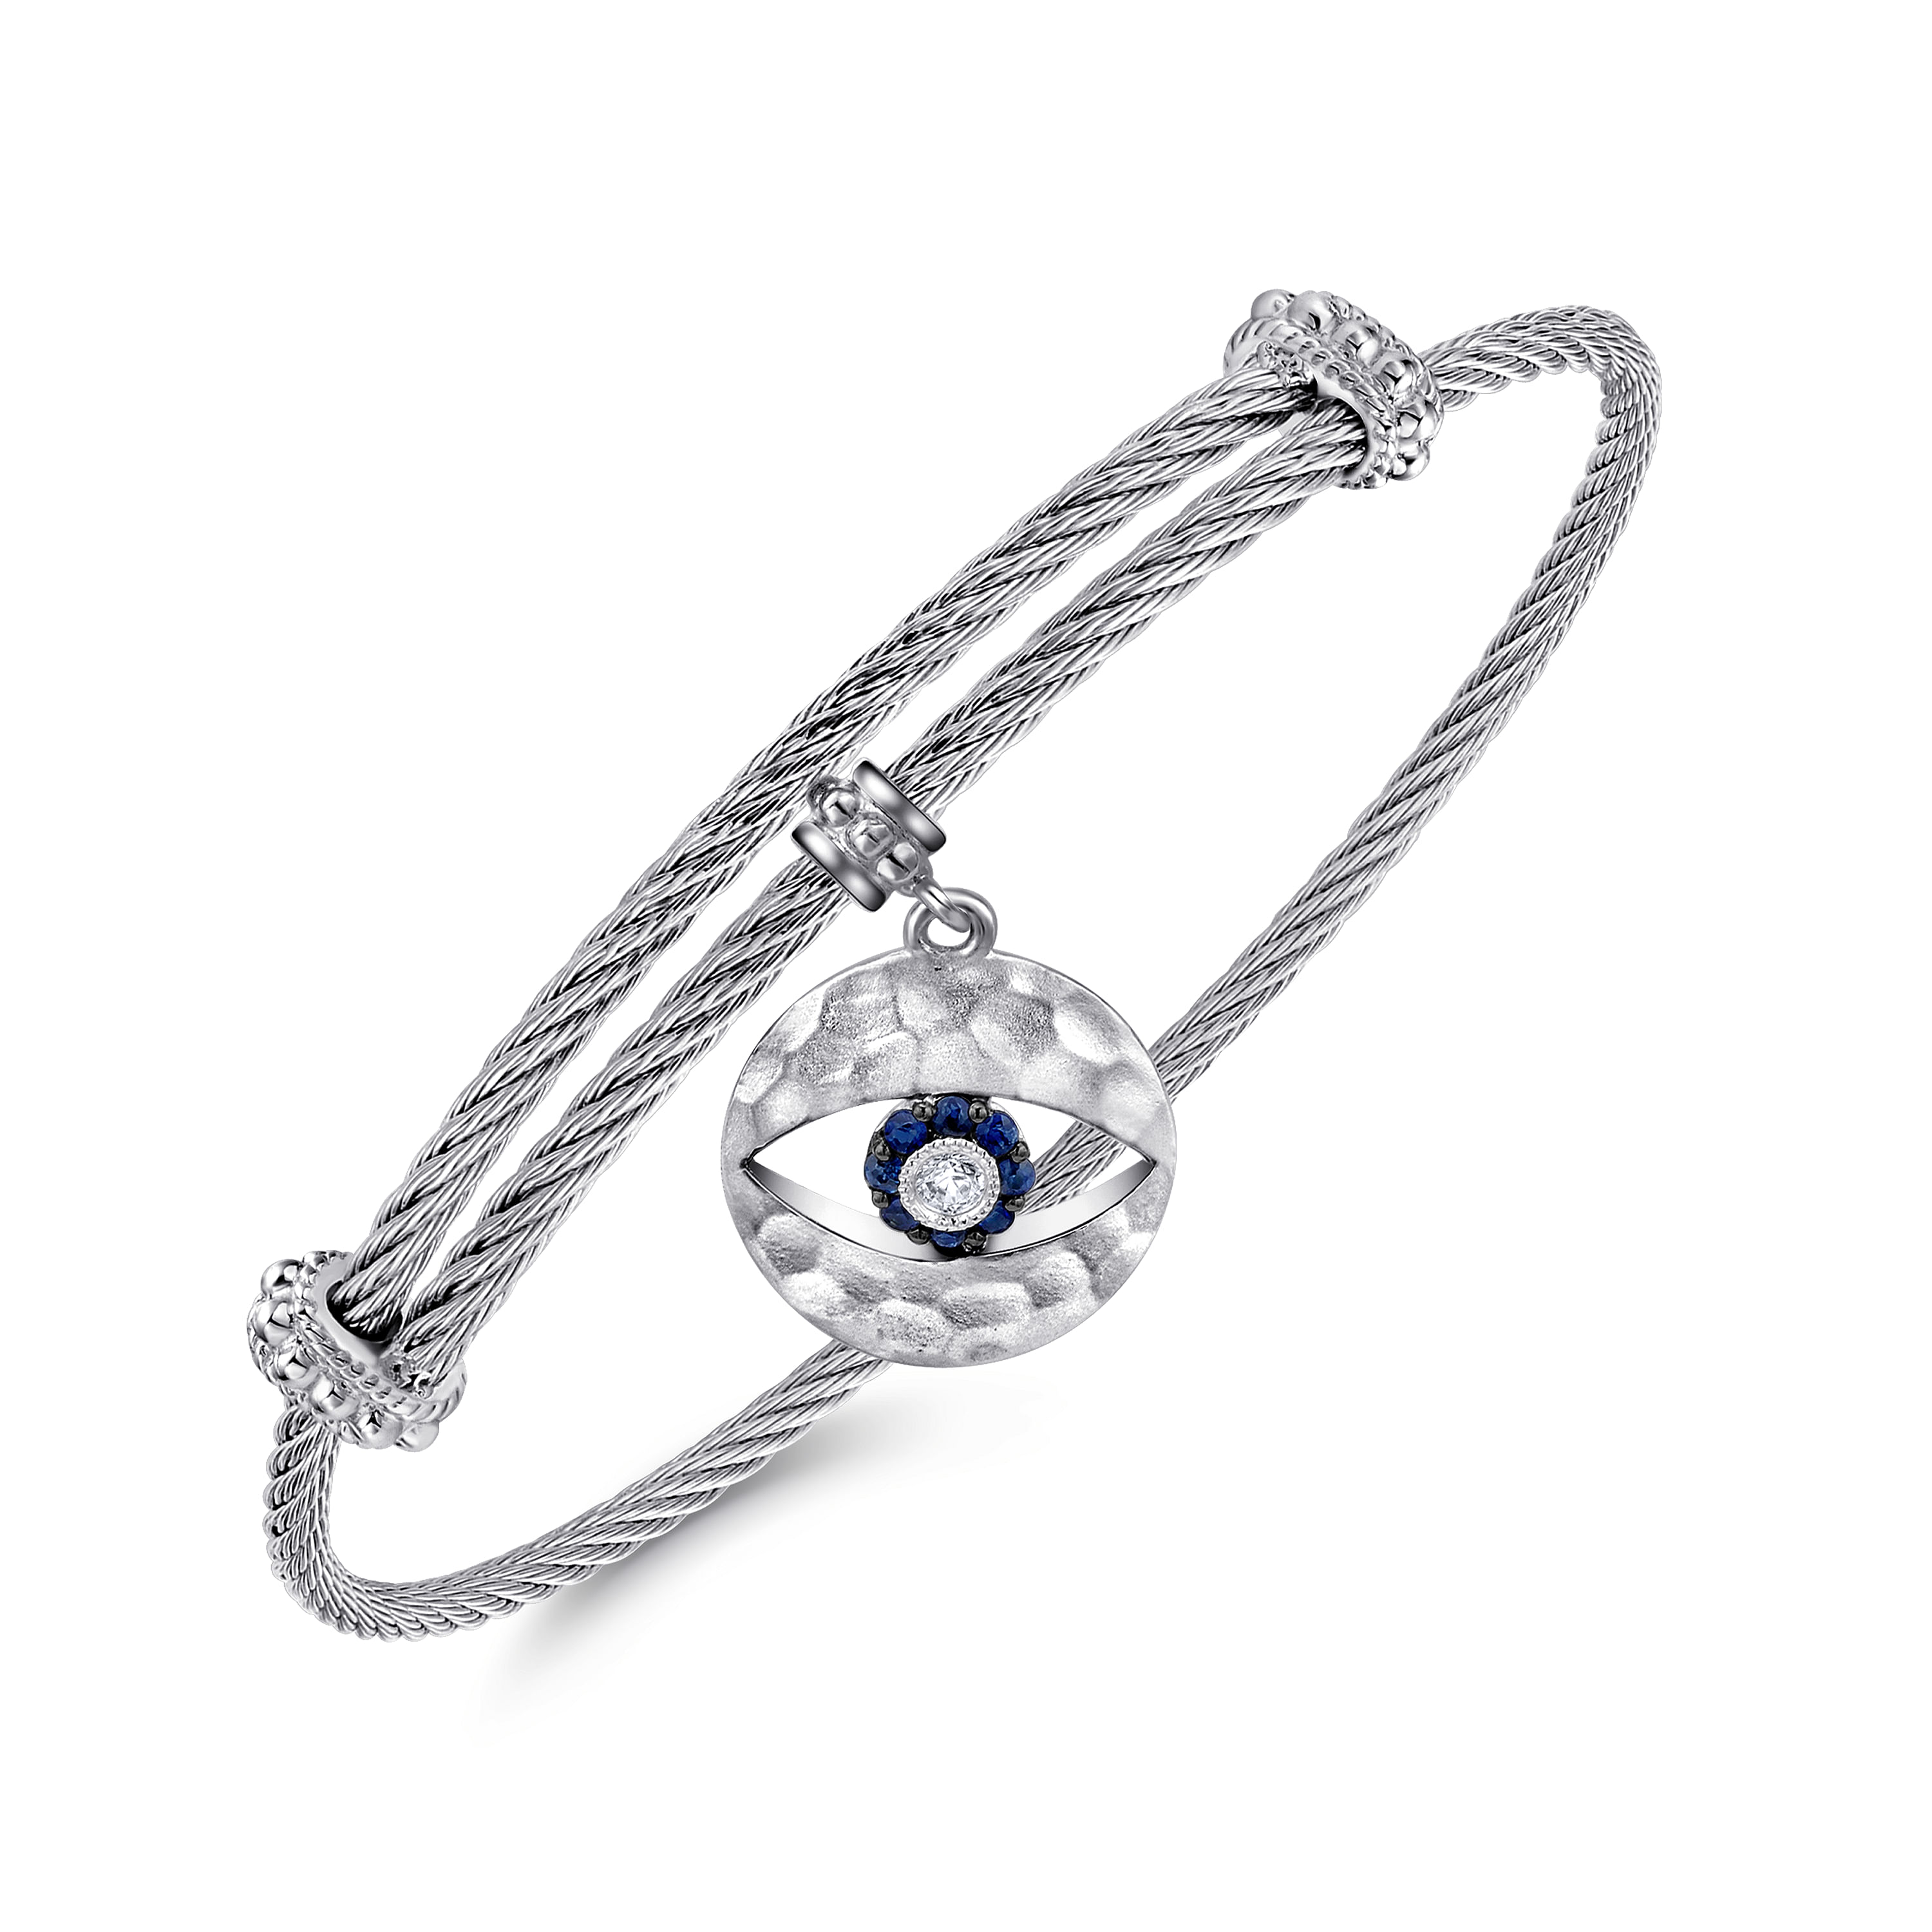 Adjustable Twisted Cable Stainless Steel Bangle with Sterling Silver Sapphire Evil Eye Charm